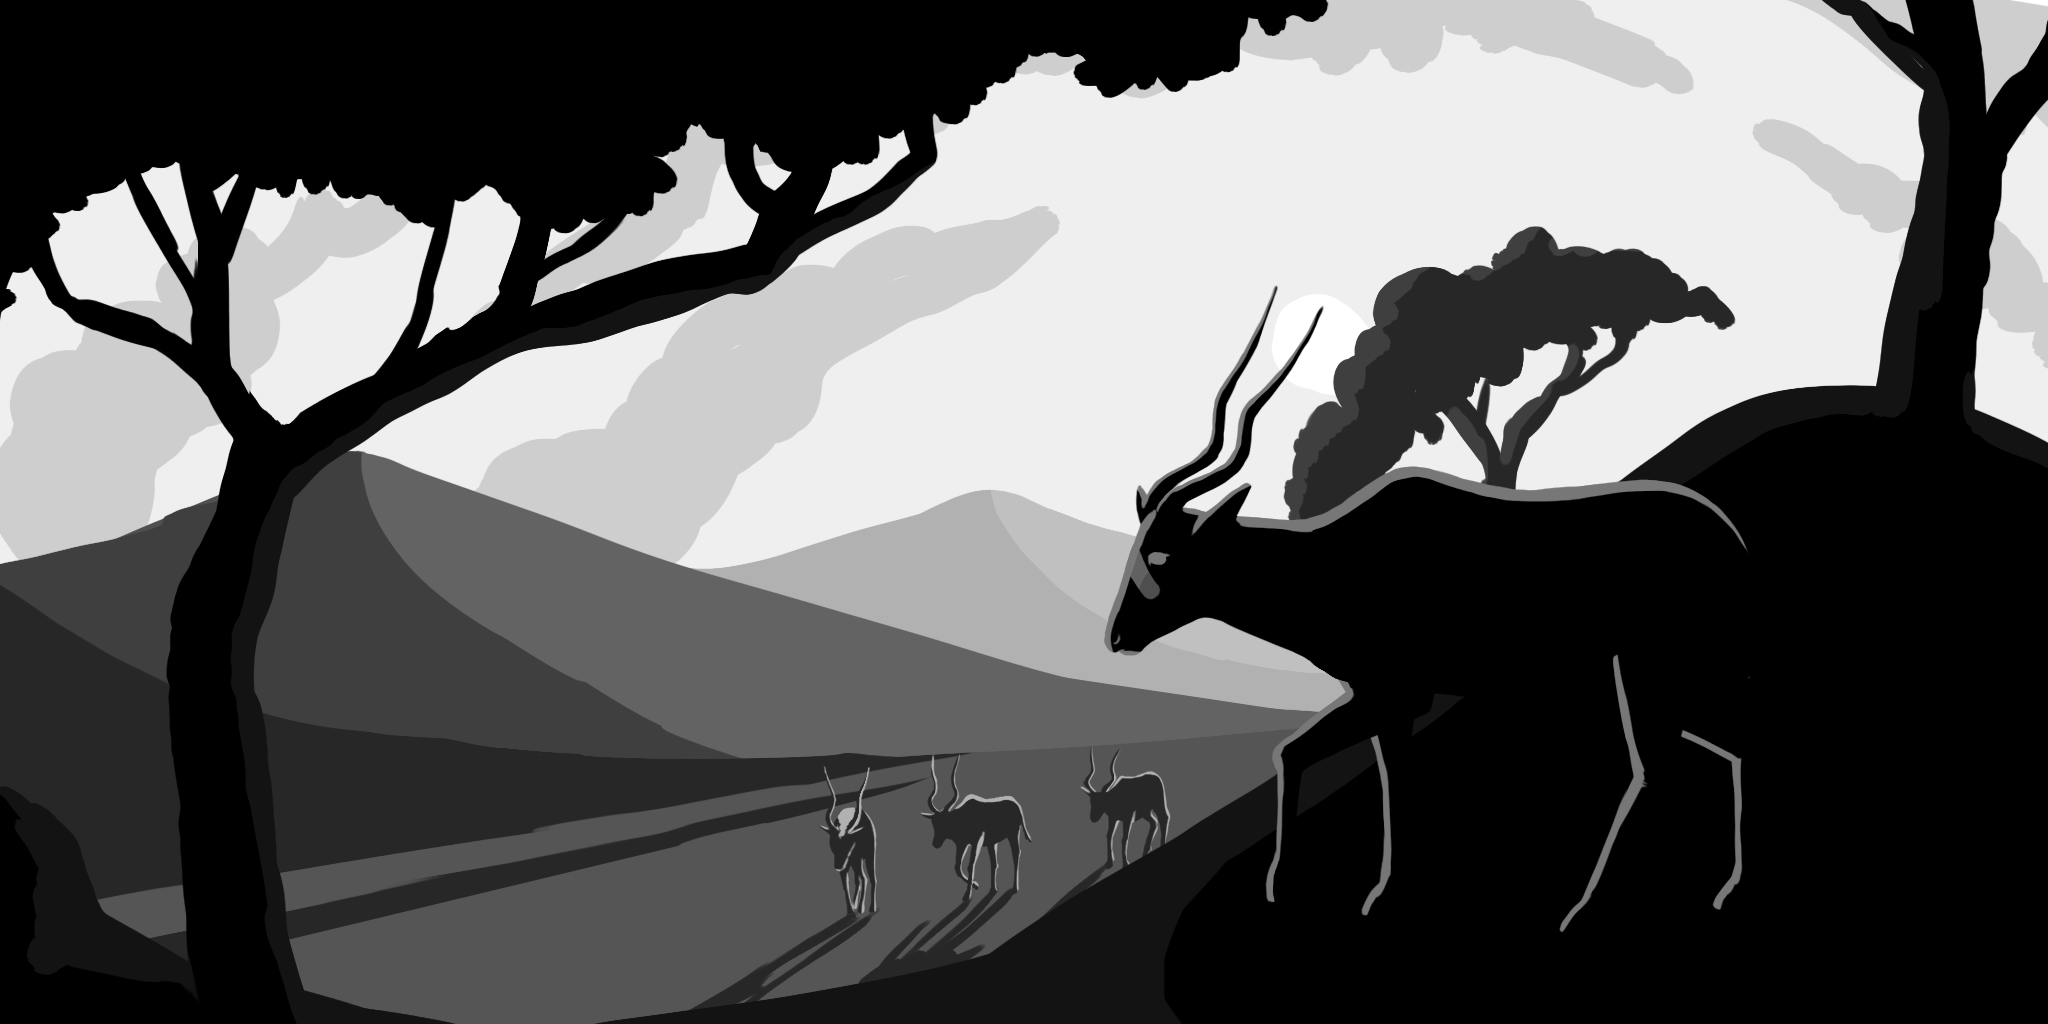 black and white in-process illustration of Addax from support zoos website